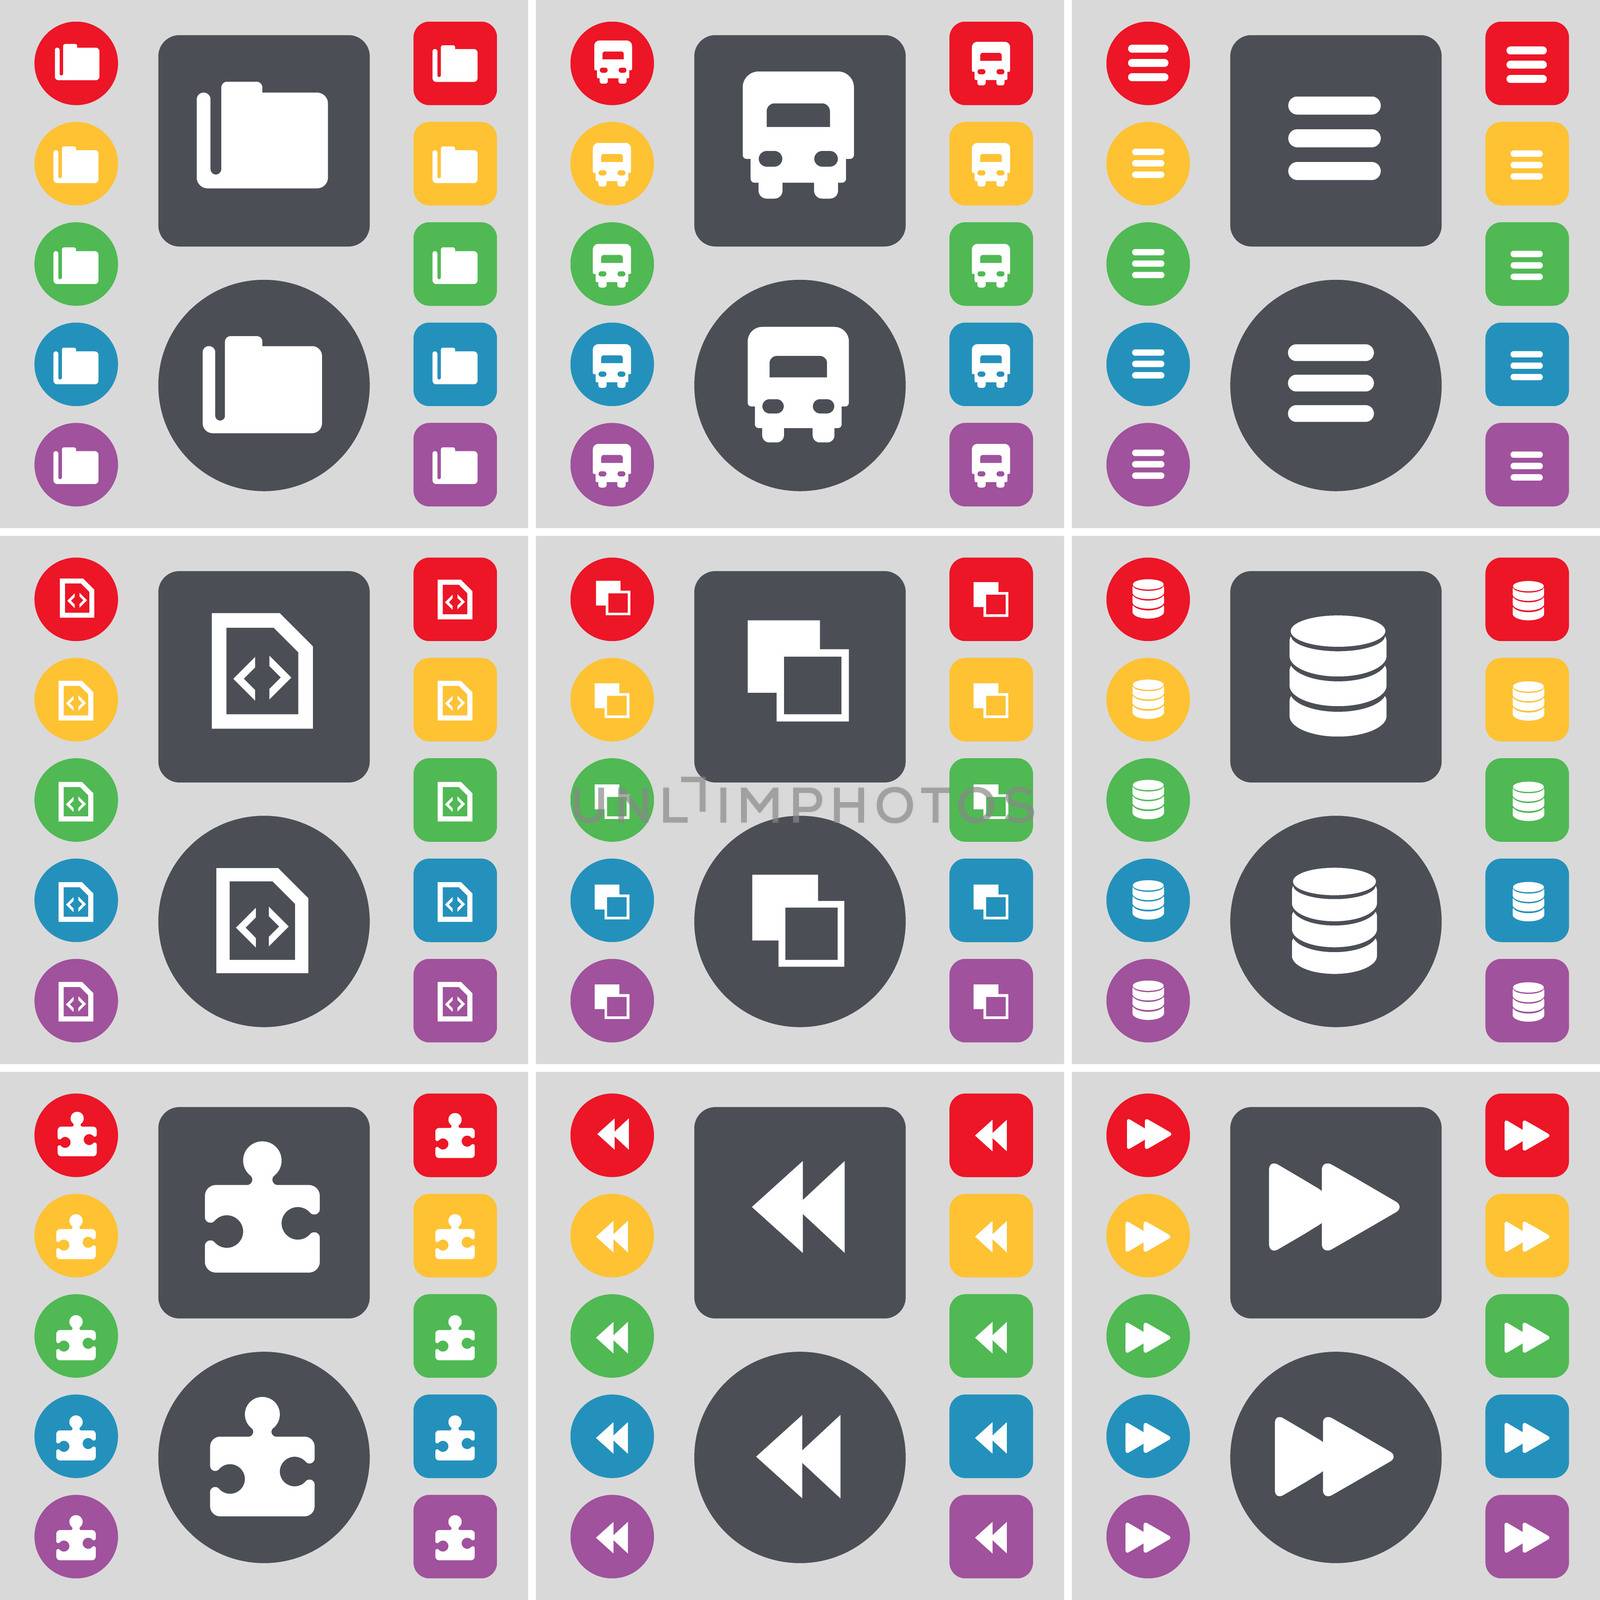 Folder, Truck, Apps, File, Copy, Database, Pazzle part, Rewind icon symbol. A large set of flat, colored buttons for your design. illustration